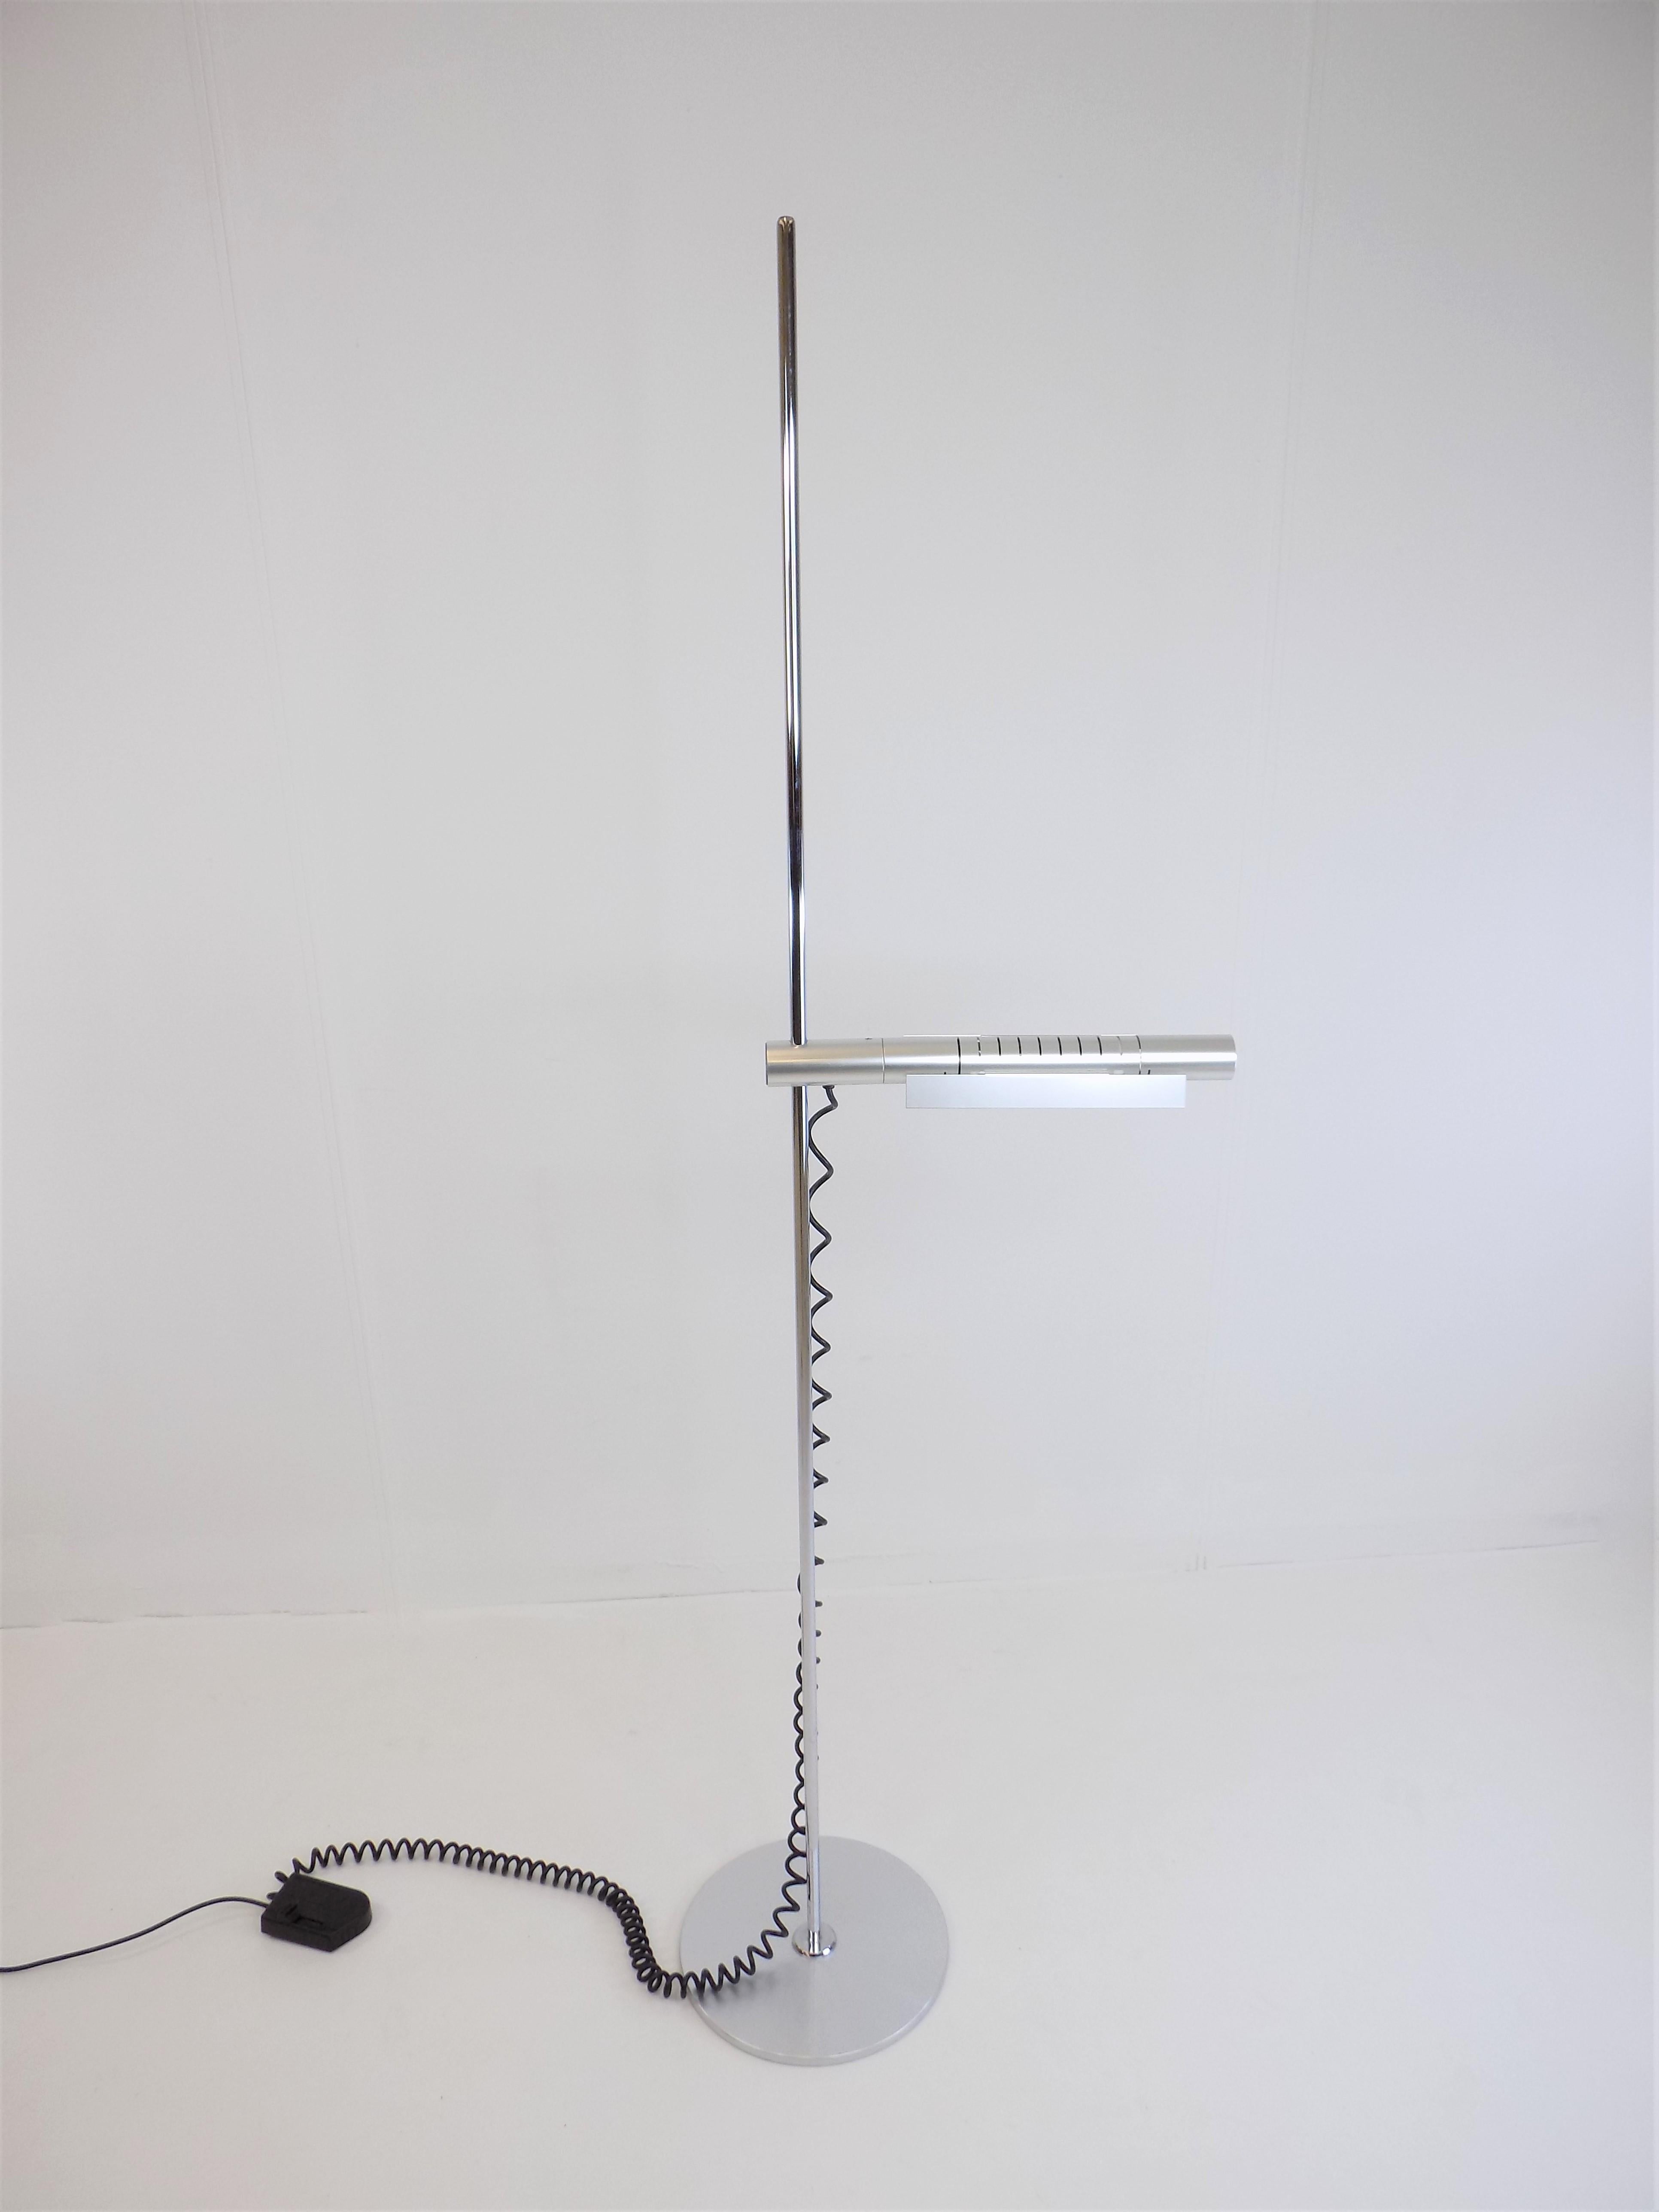 Swisslamps International Halo 250 Floor Lamp by R. and R. Baltensweiler For Sale 11